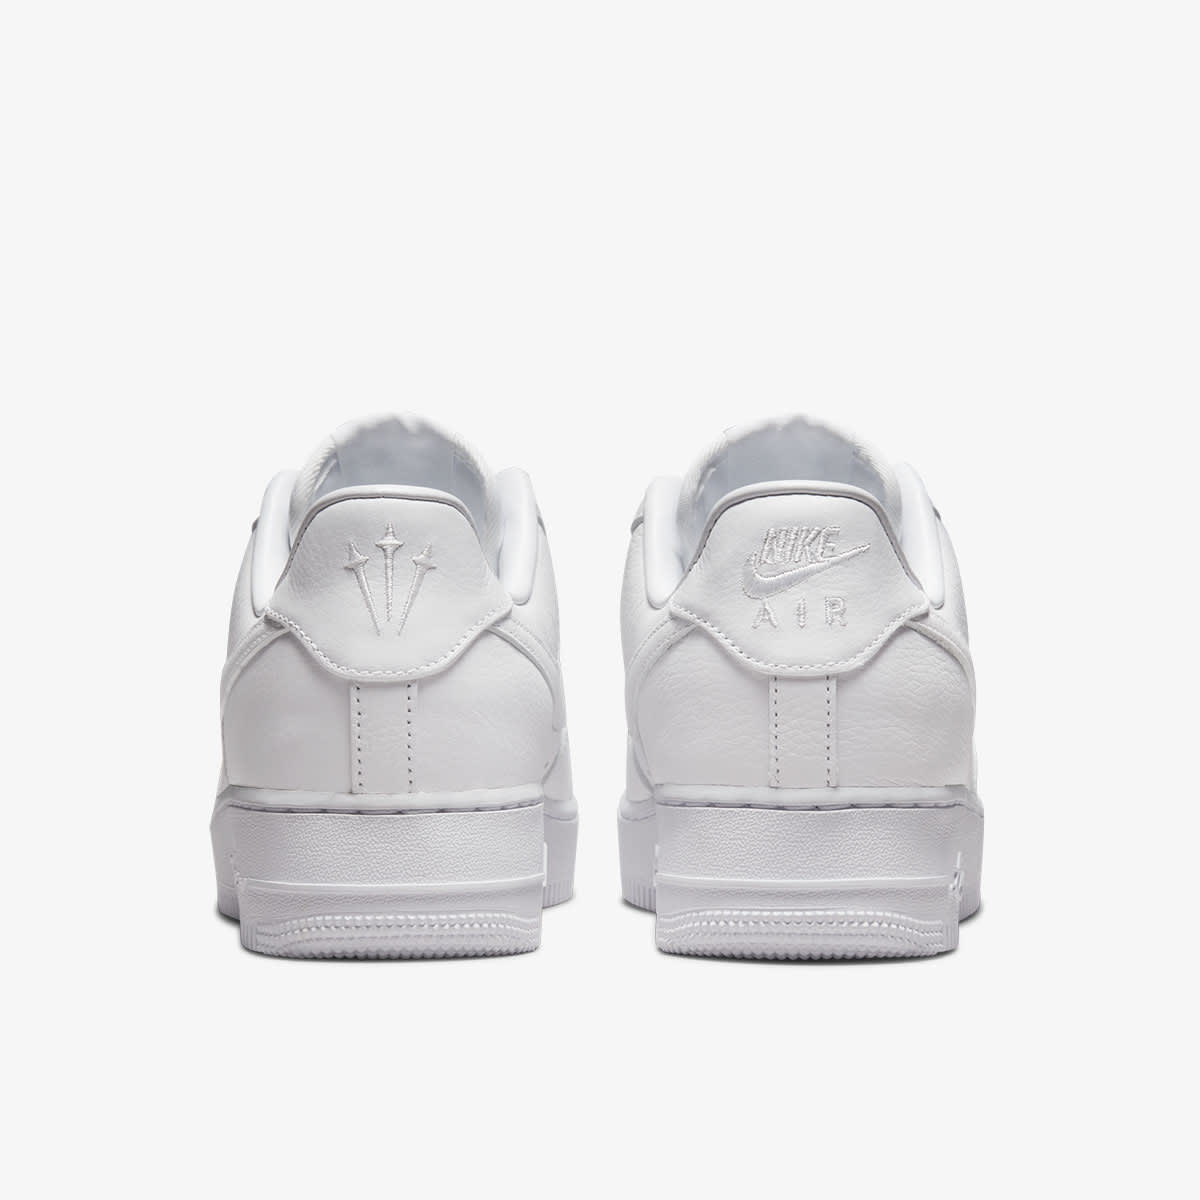 Nike X Nocta Air Force 1 Low Sp (White & Colbalt) | END. Launches